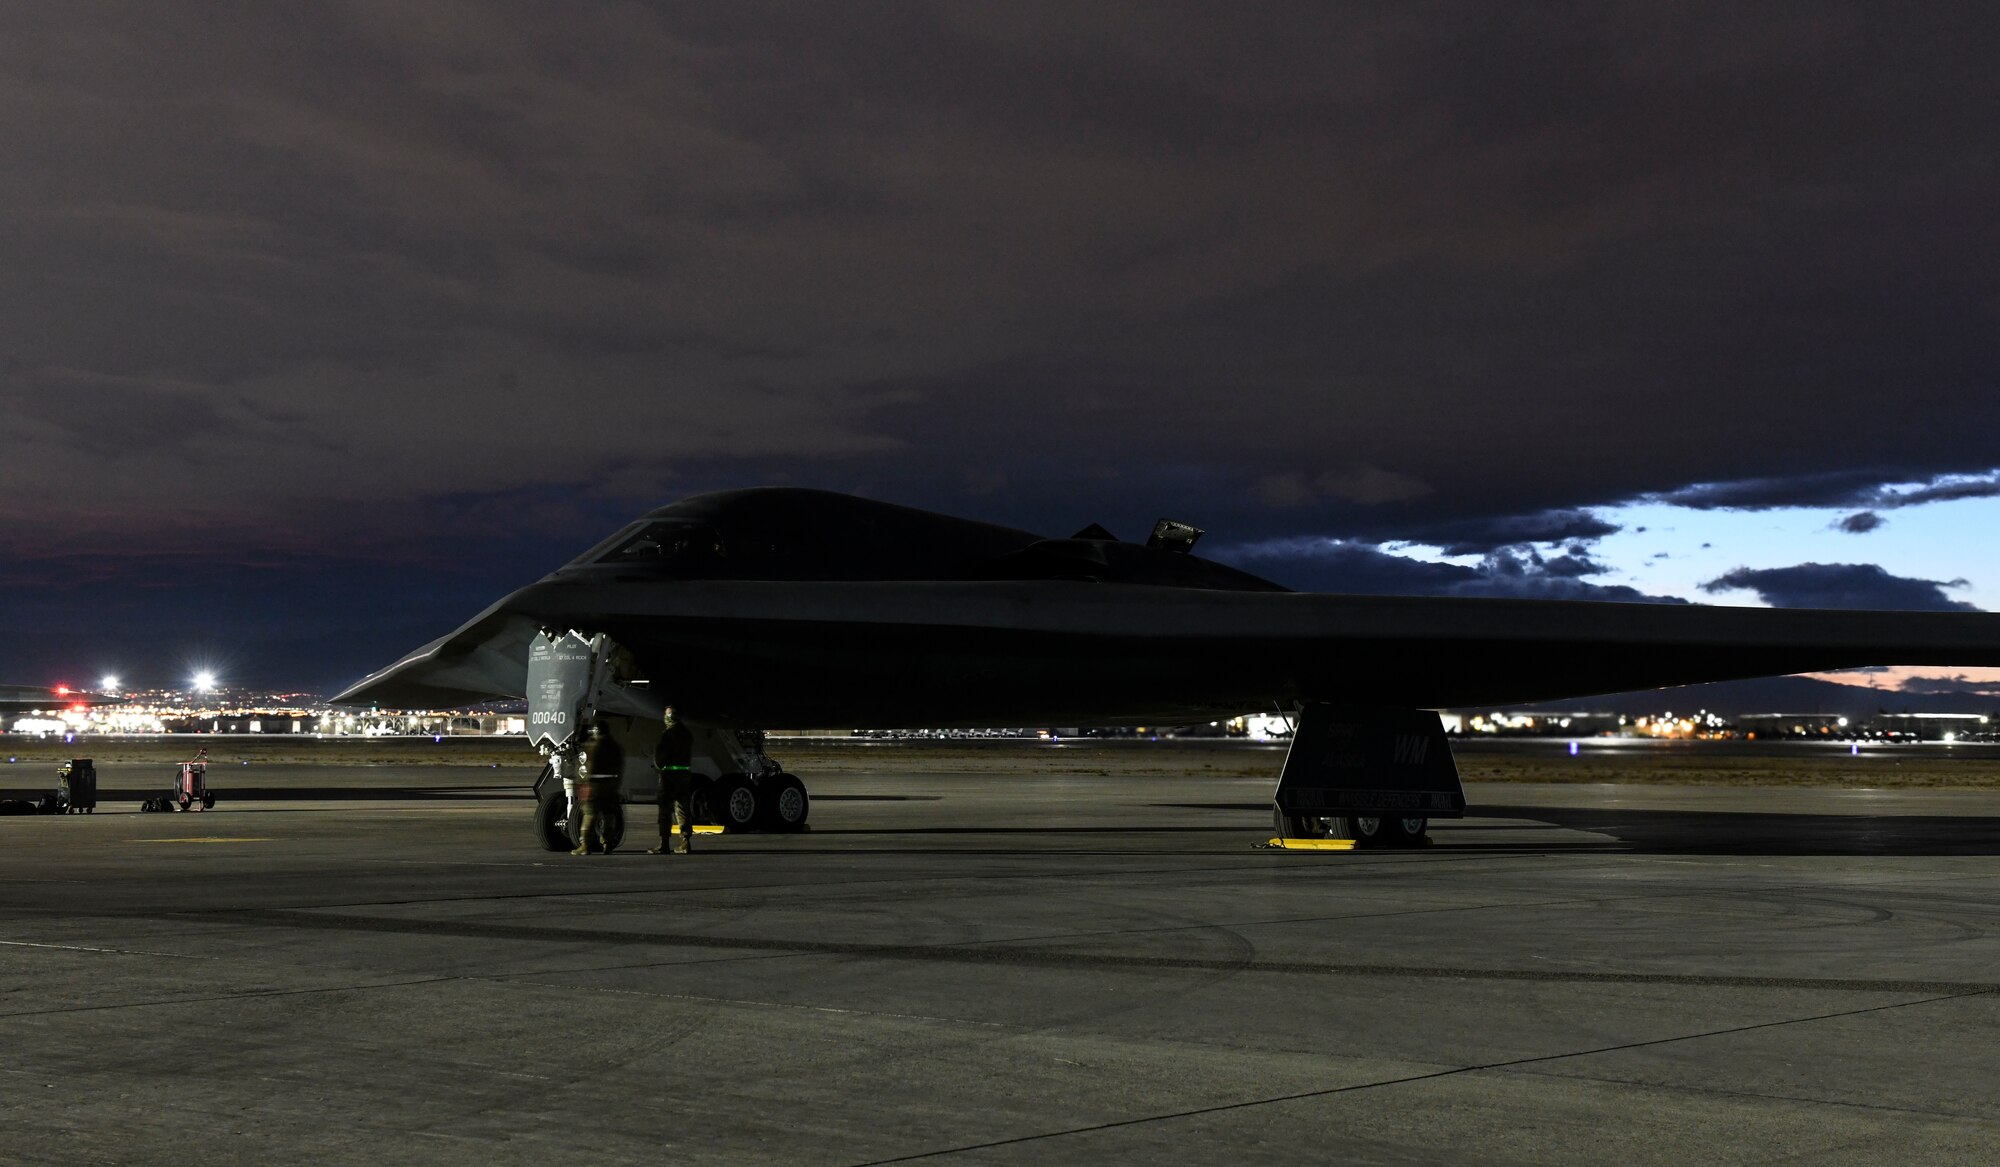 A B-2 Spirit Stealth Bomber sits on a flightline during Red Flag 21-1, at Nellis Air Force Base, Nevada, Feb. 1, 2021. During Red Flag 21-1, the 393rd Expeditionary Bomb Squadron flew B-2 Spirit Stealth Bomber training missions with multiple aircraft in order to further enhance their experience for future sorties. Aircrews rotated their mission duties throughout the large-force exercise, expanding their ability to plan and execute operations best fit for various contingency scenarios. (U.S. Air Force photo by Staff Sgt. Sadie Colbert)